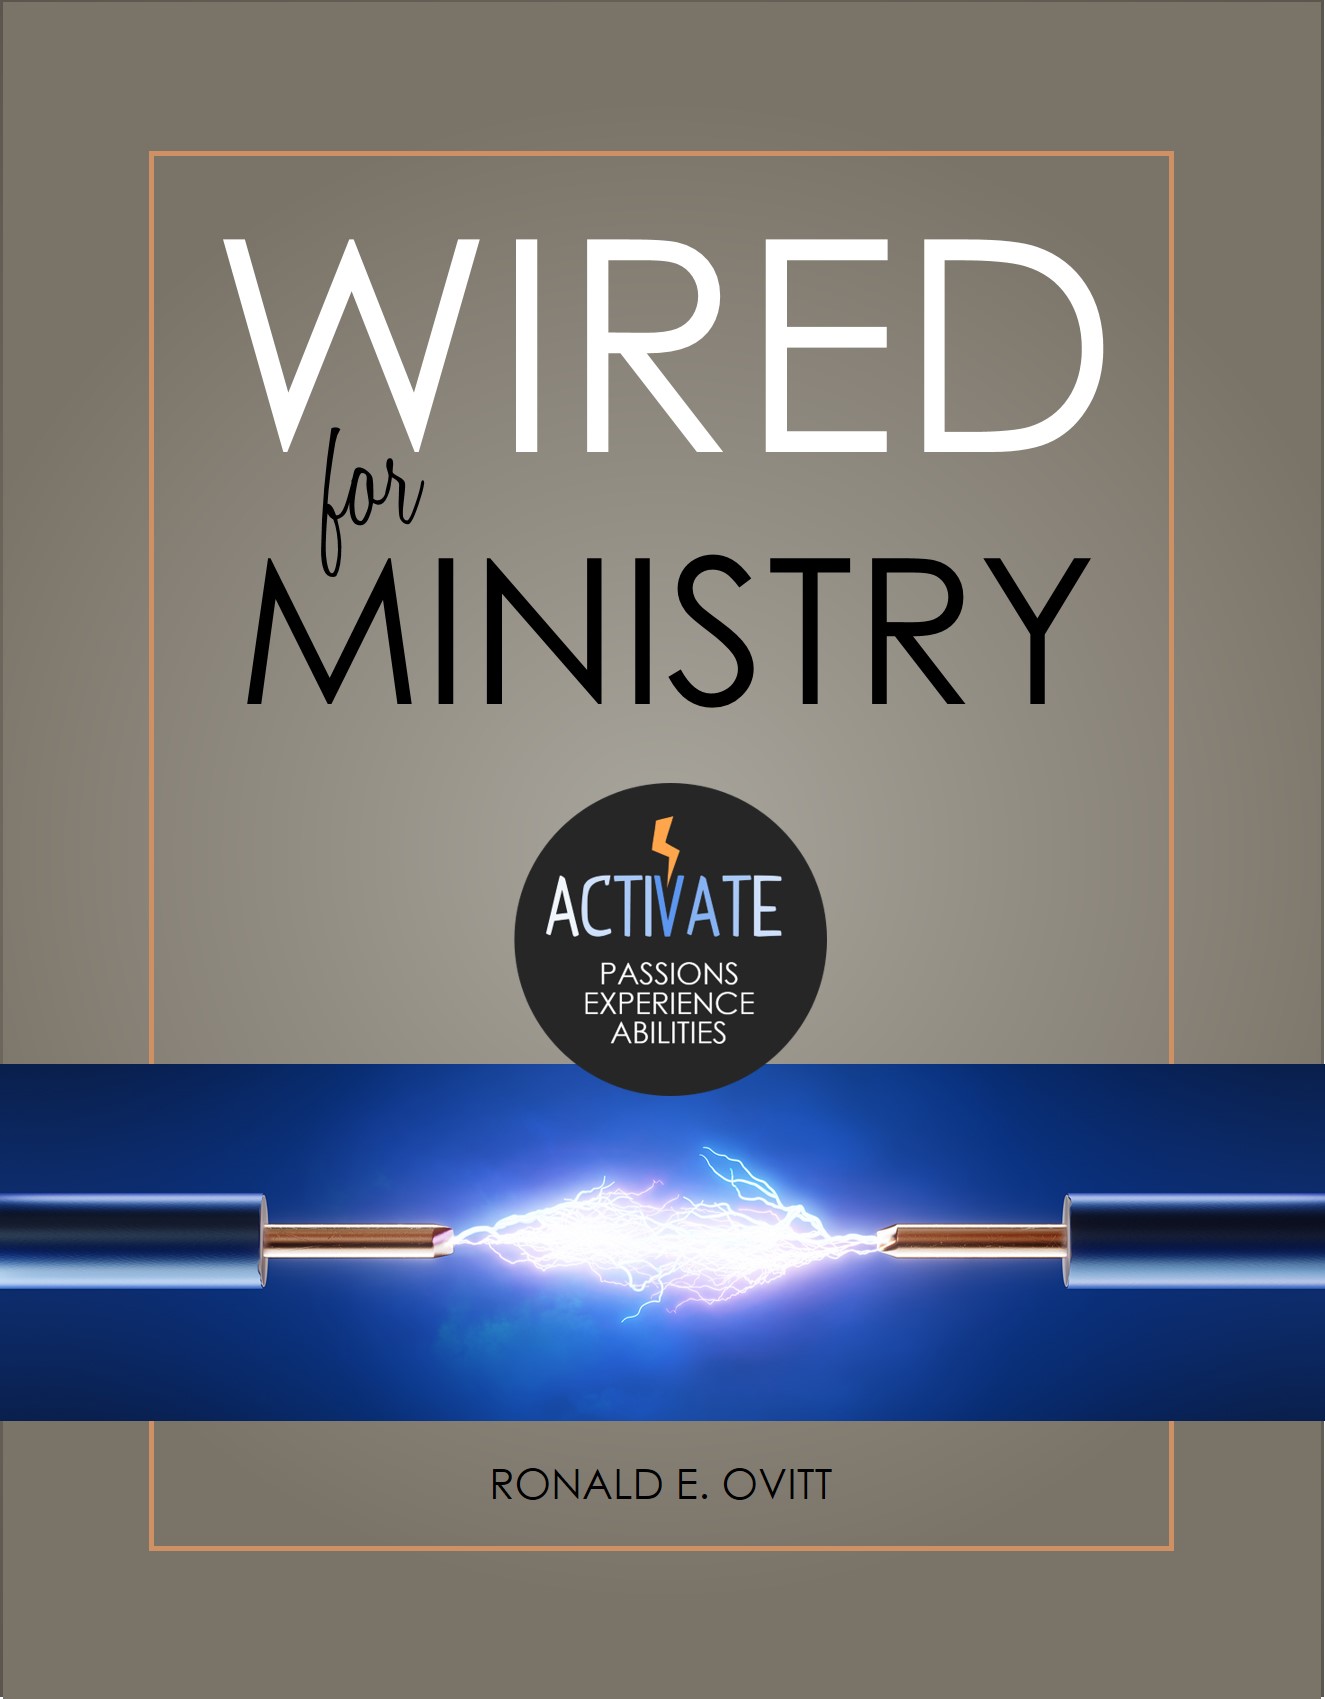 Cover of "Wired for Ministry" book